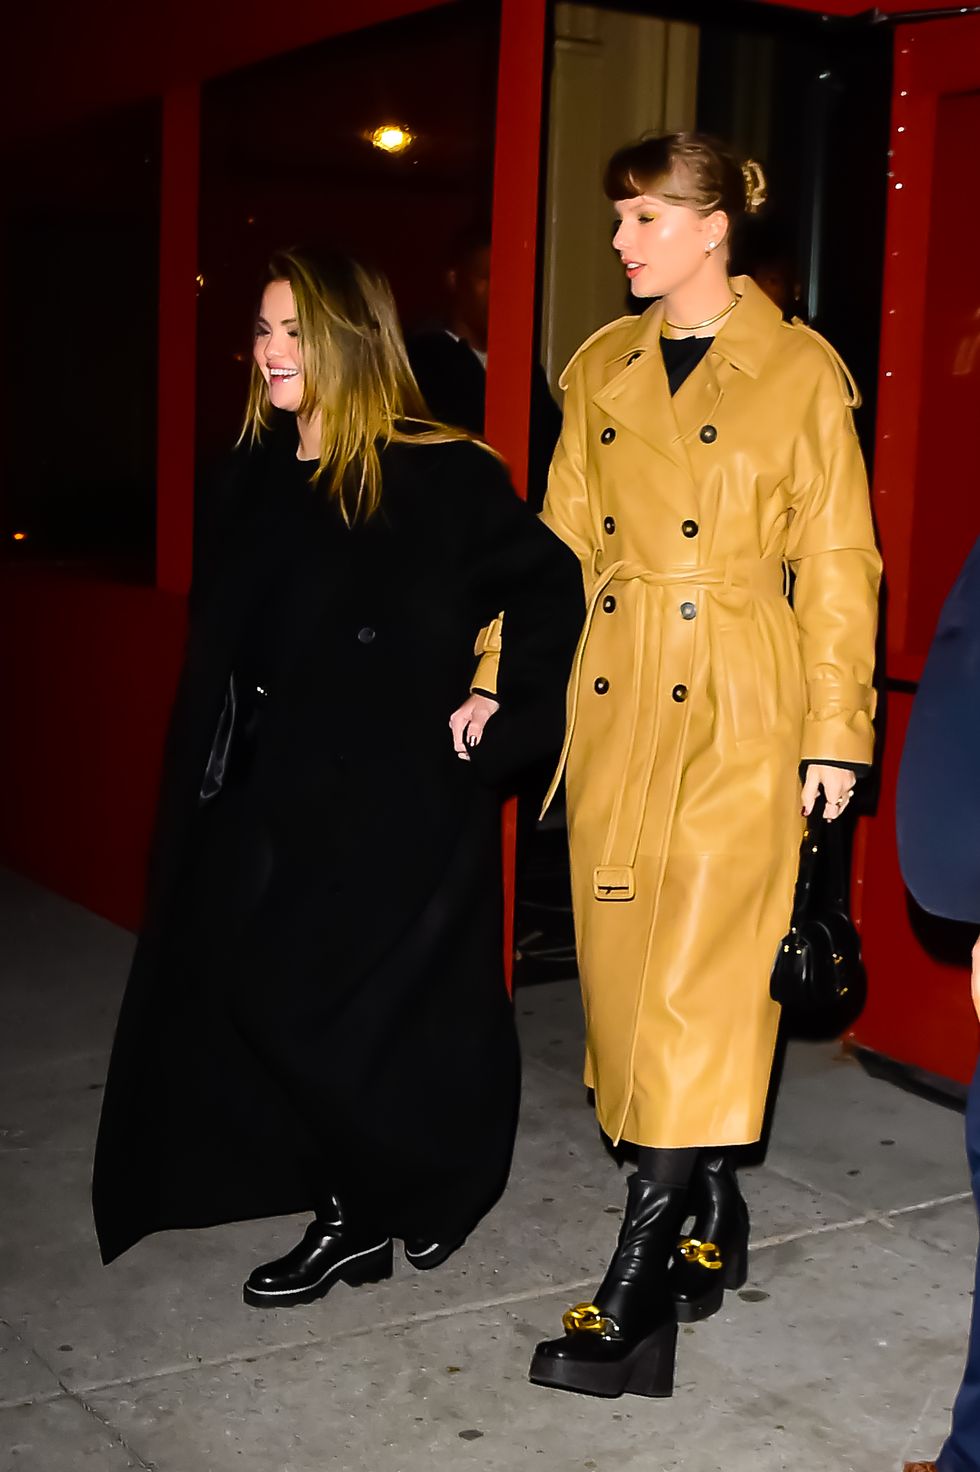 selena gomez and taylor swift in new york city on december 12, 2023